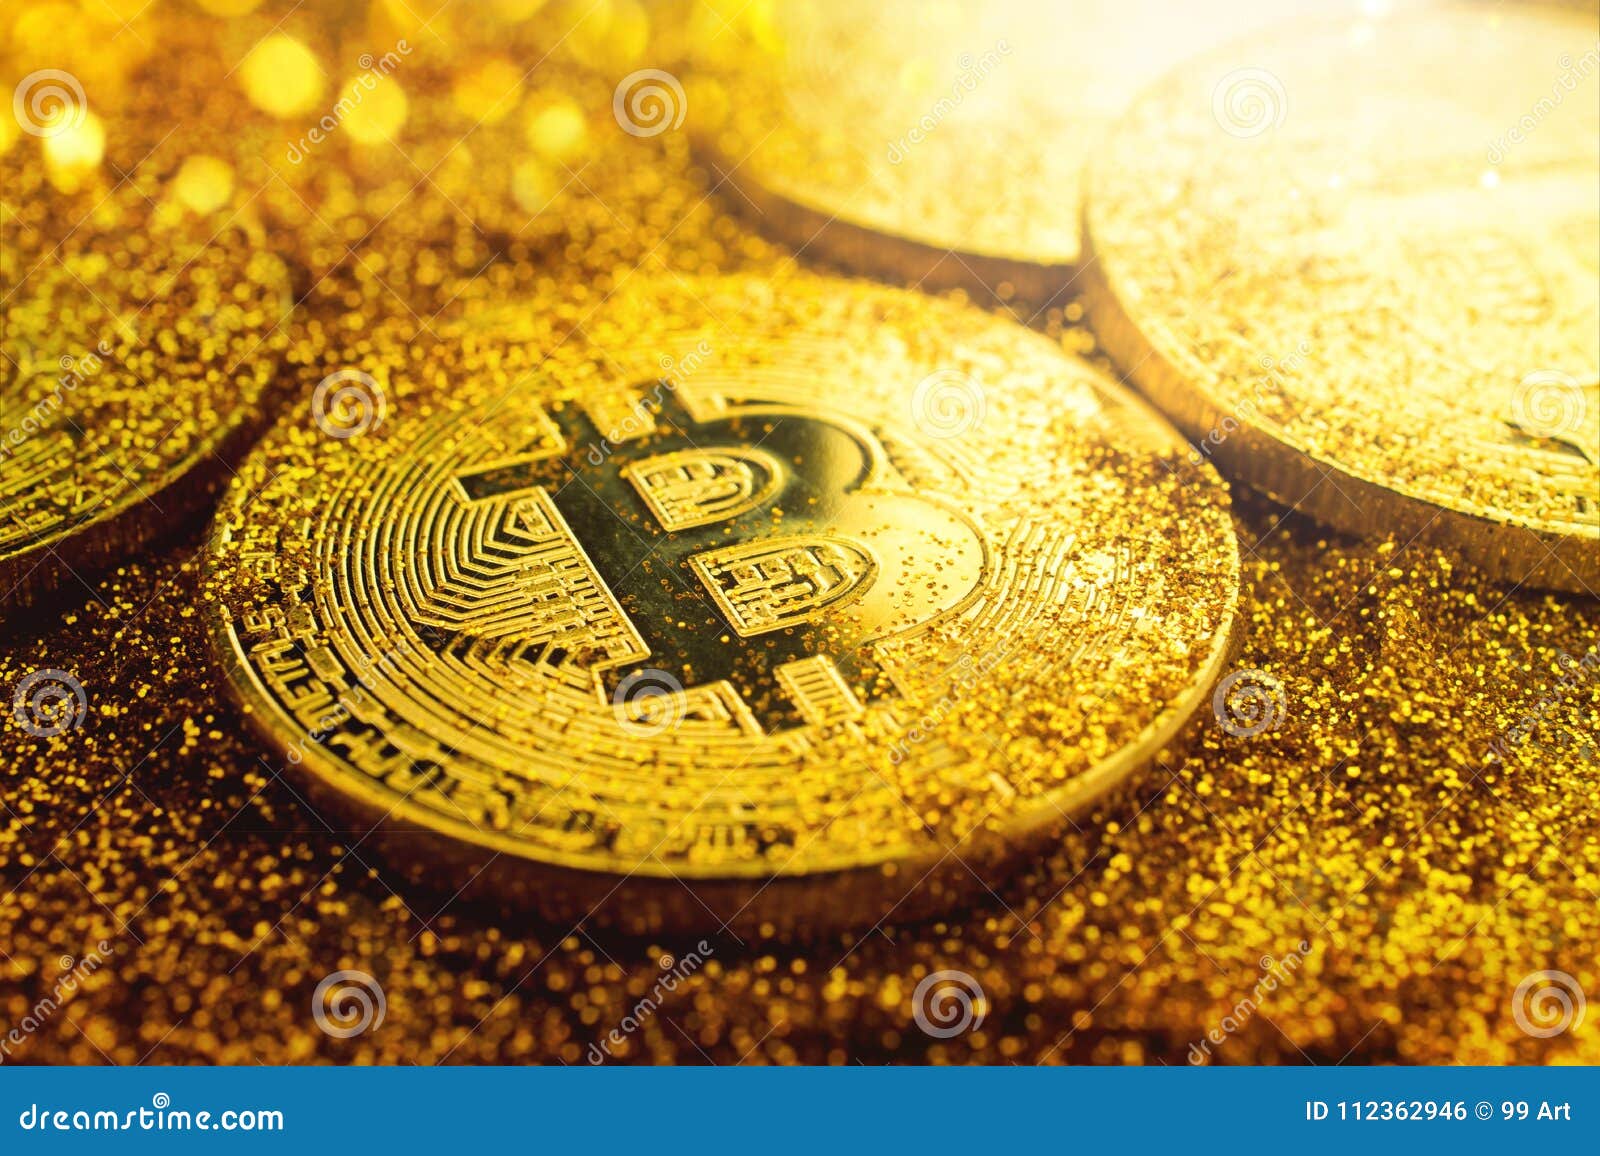 golden bitcoin coin with glitter lights grunge crypto currency